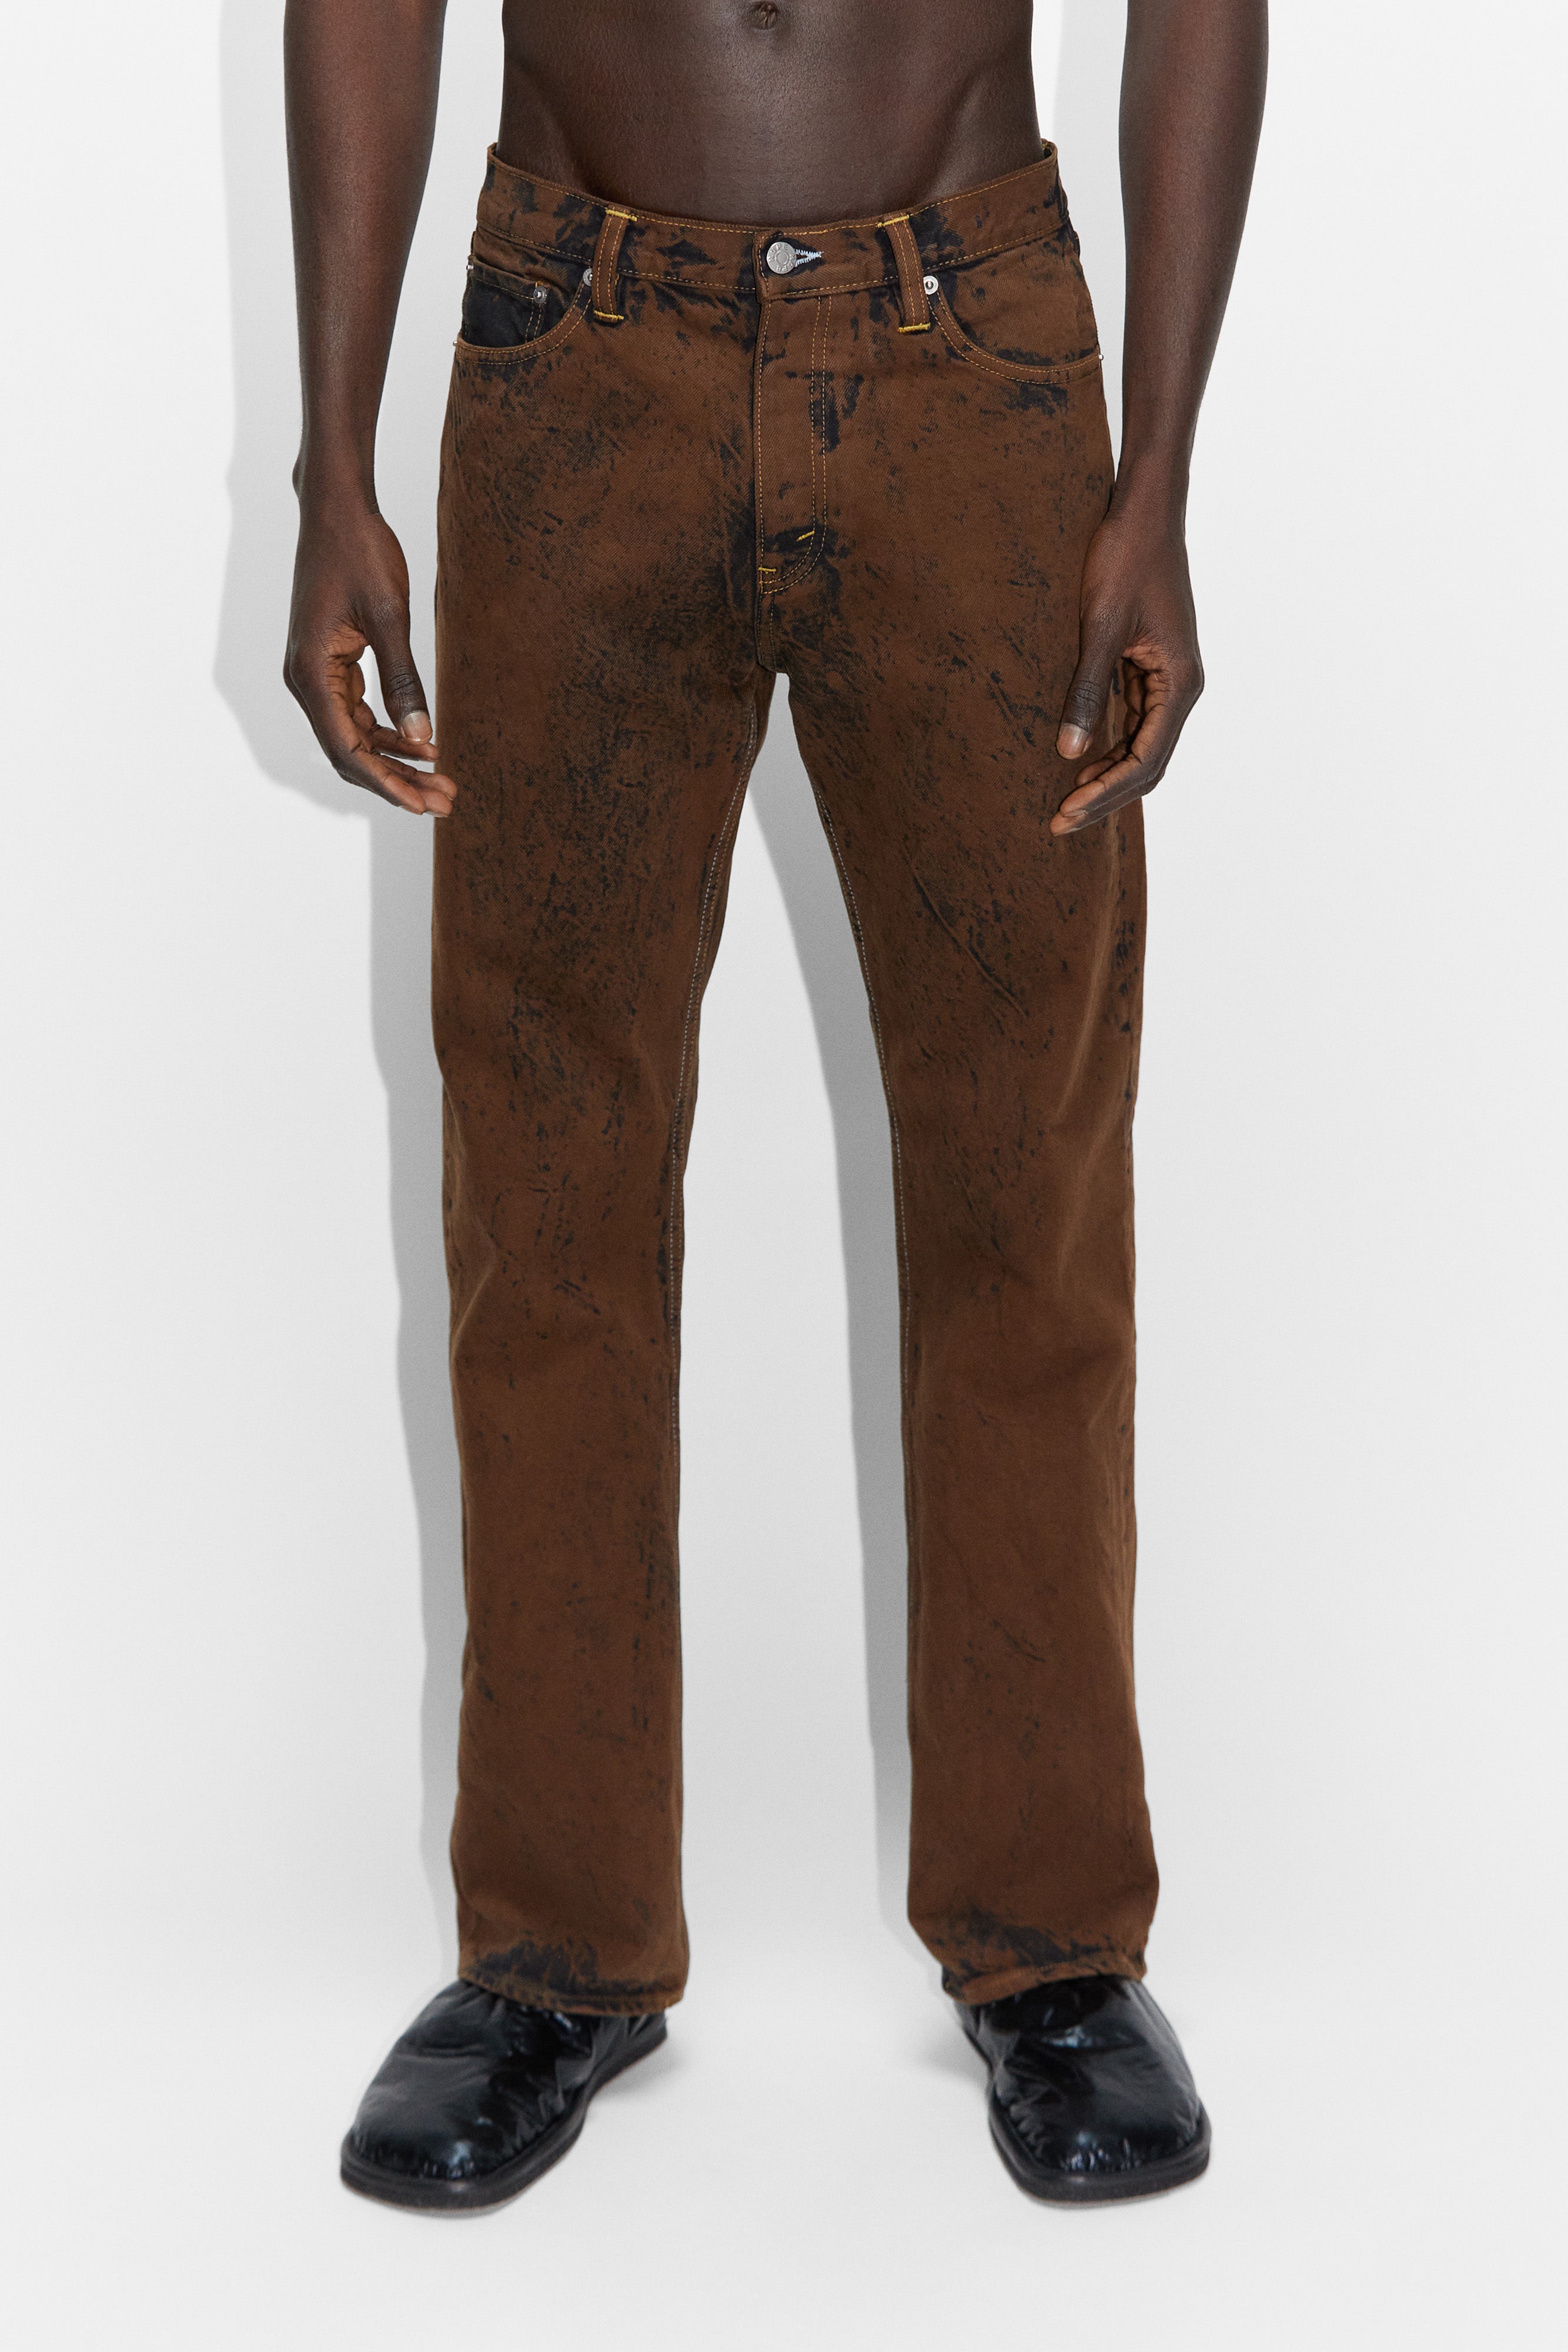 Jeans - in Rush STHLM Acid Bootcut Brown – HOPE Relaxed